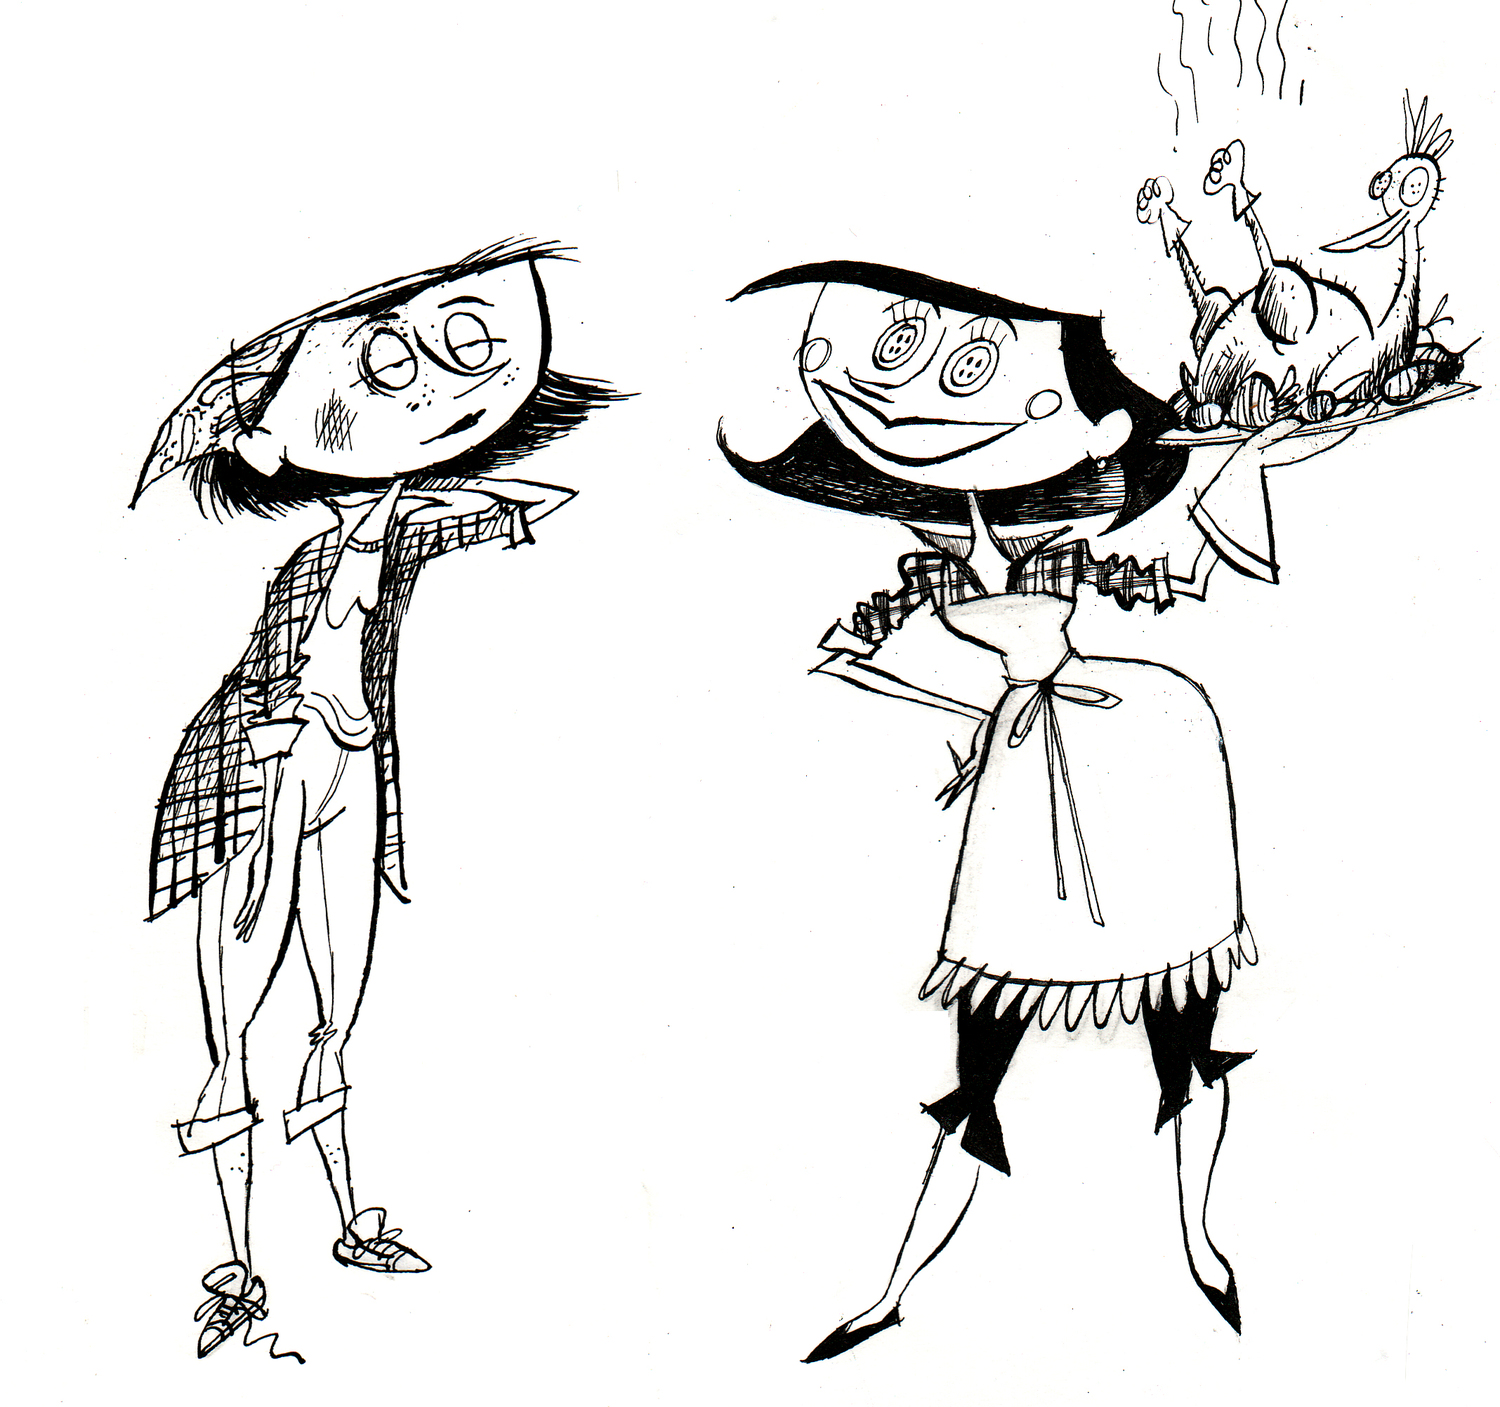 Other mother Coraline book illustration by Tugsjargal on Dribbble